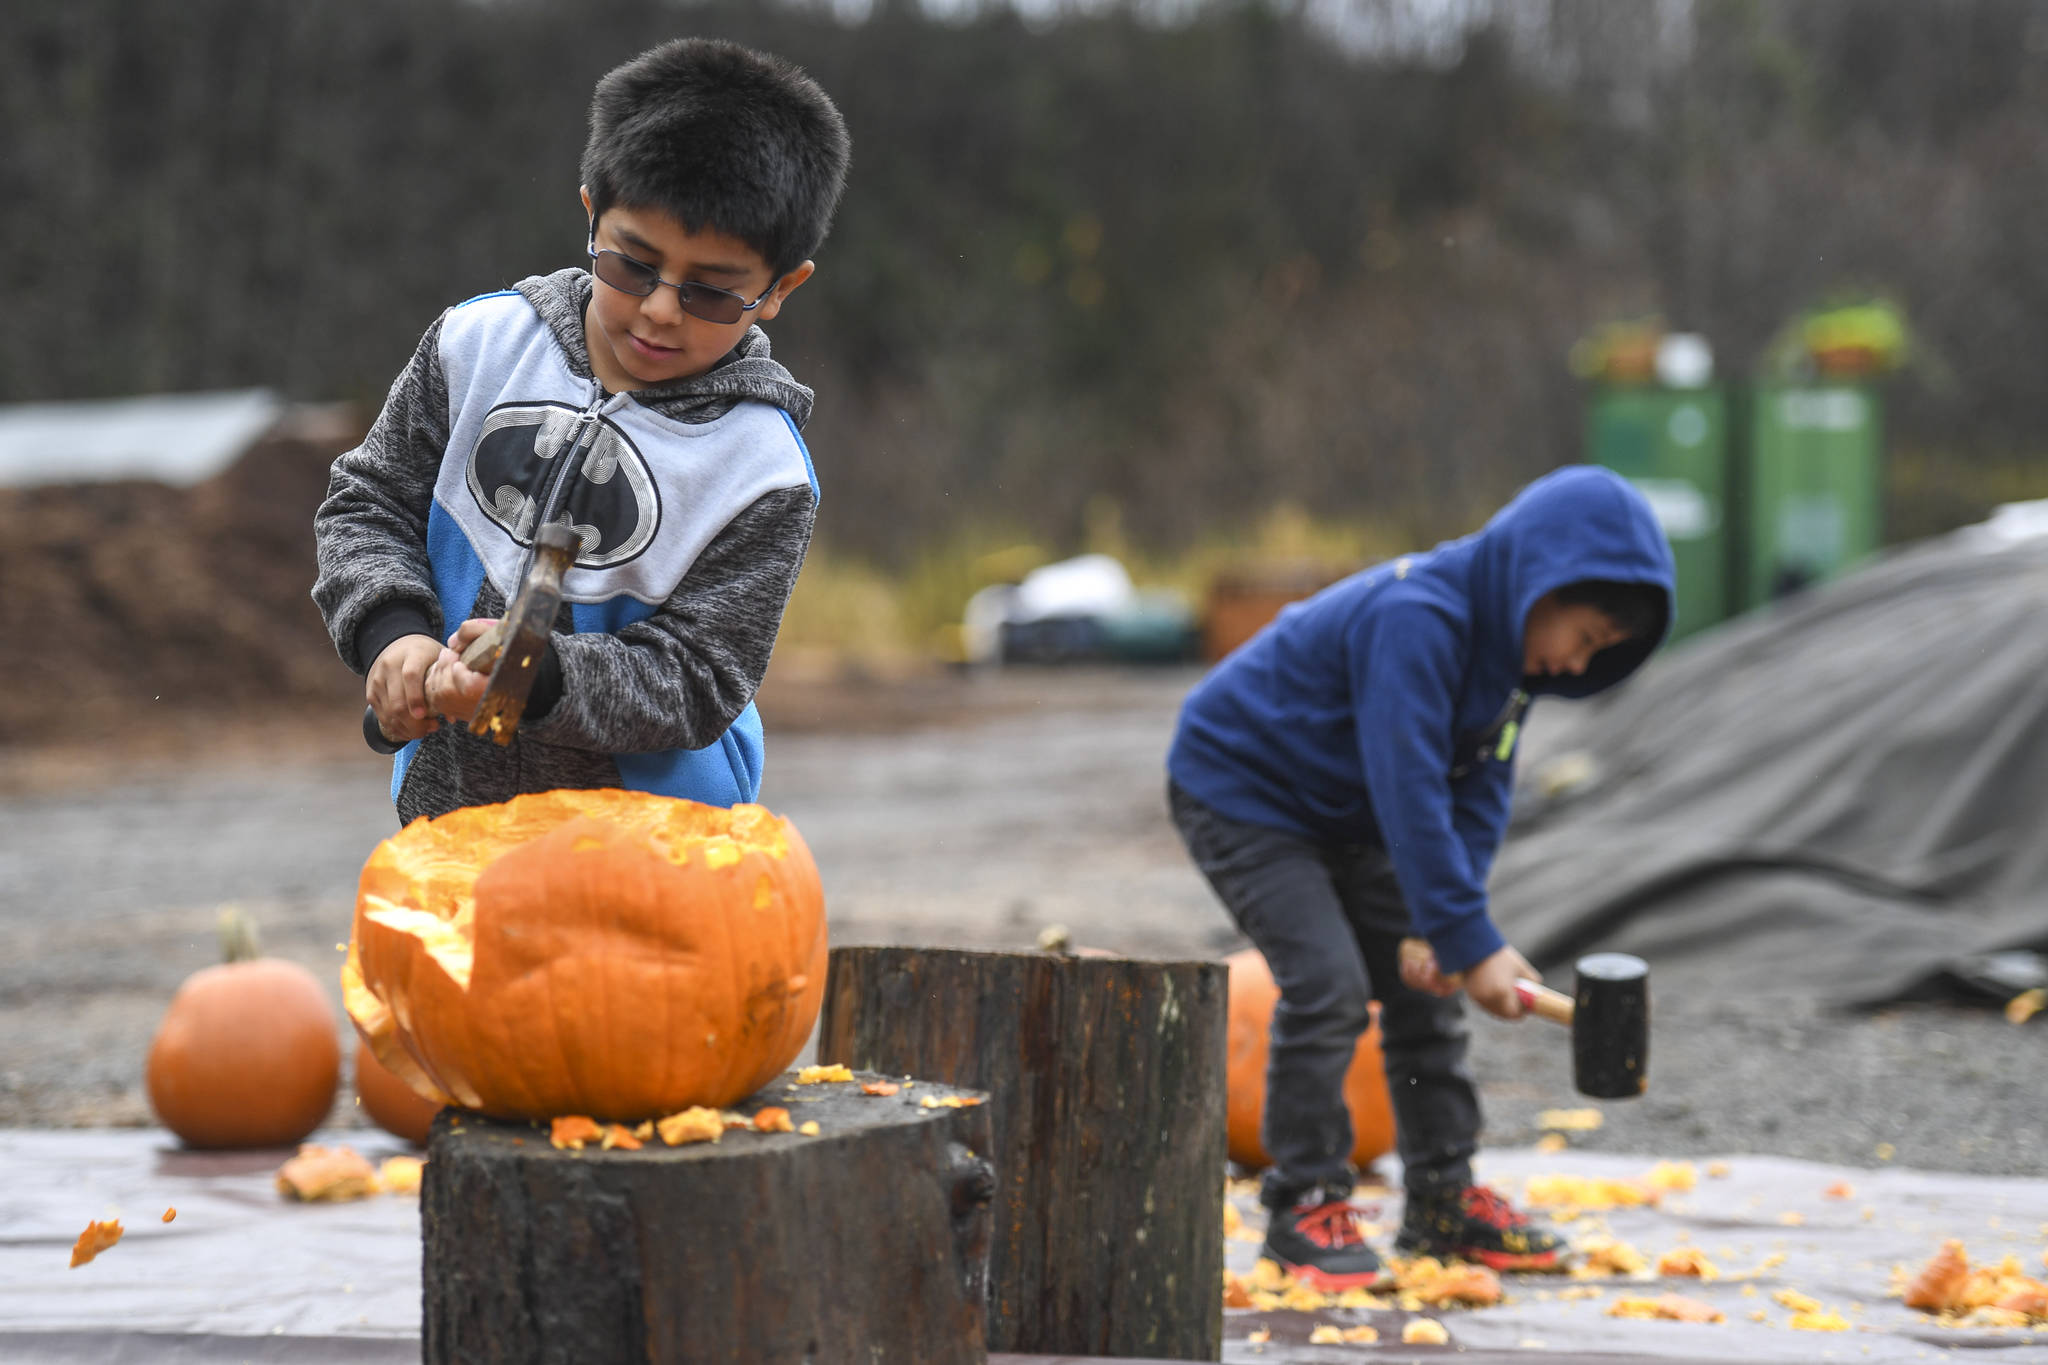 Emilio Delgado, 6, left, and his brother, Jolvanni, 5, smash pumpkins at Juneau Composts! on Sunday, Nov. 3, 2019. Juneau Composts! owner Lisa Daugherty put on the event as a fun way of keeping the holiday pumkins out of the landfill. (Michael Penn | Juneau Empire)